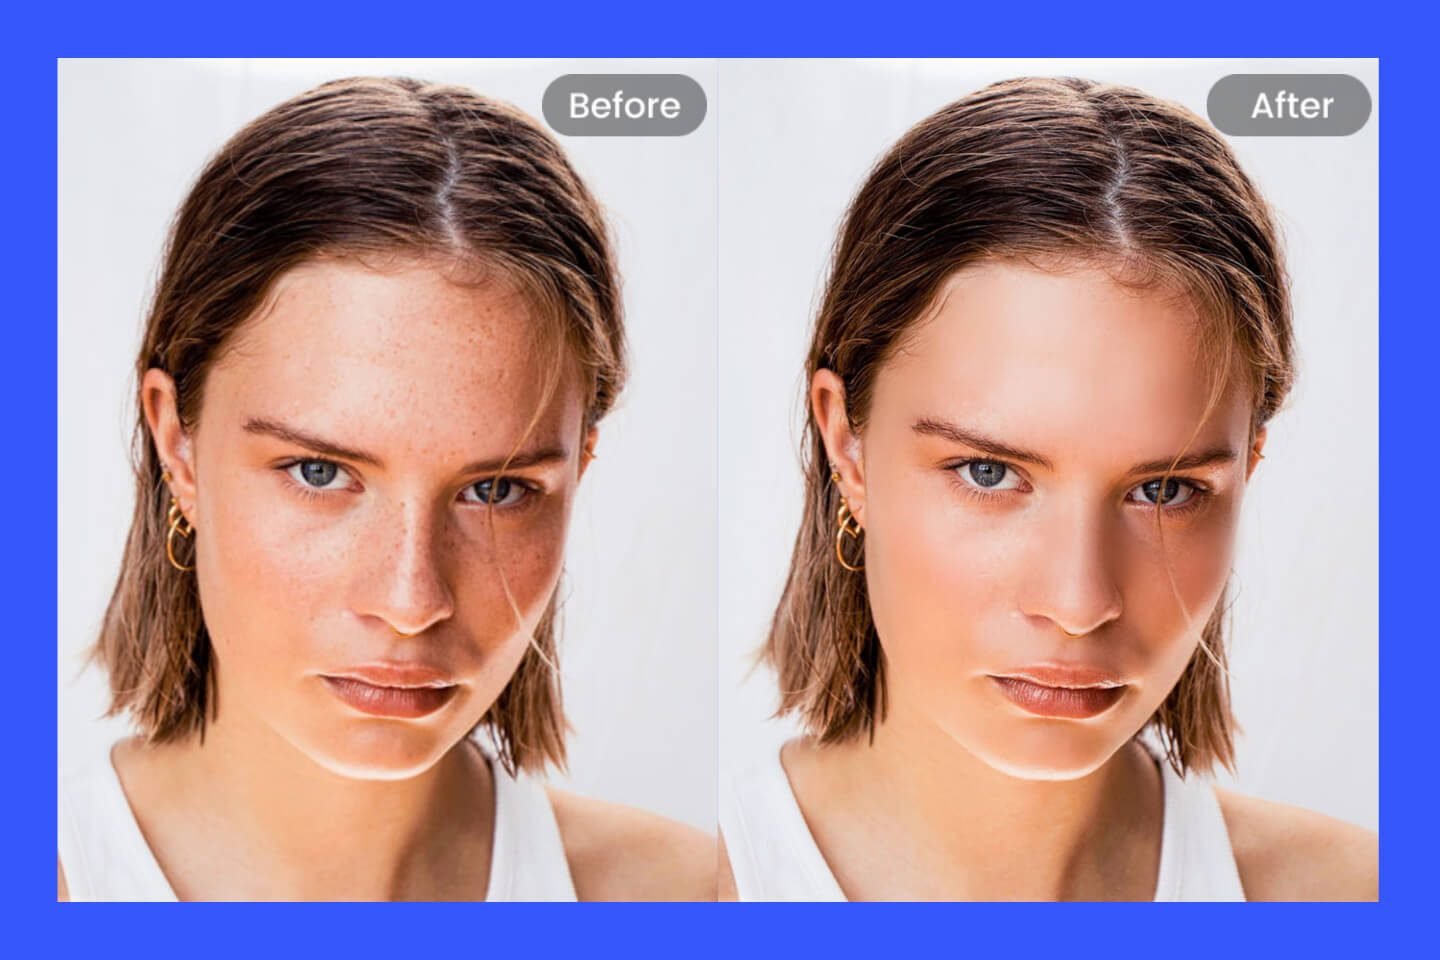 Makeup Photo Editor Online for Retouching Photos | Fotor